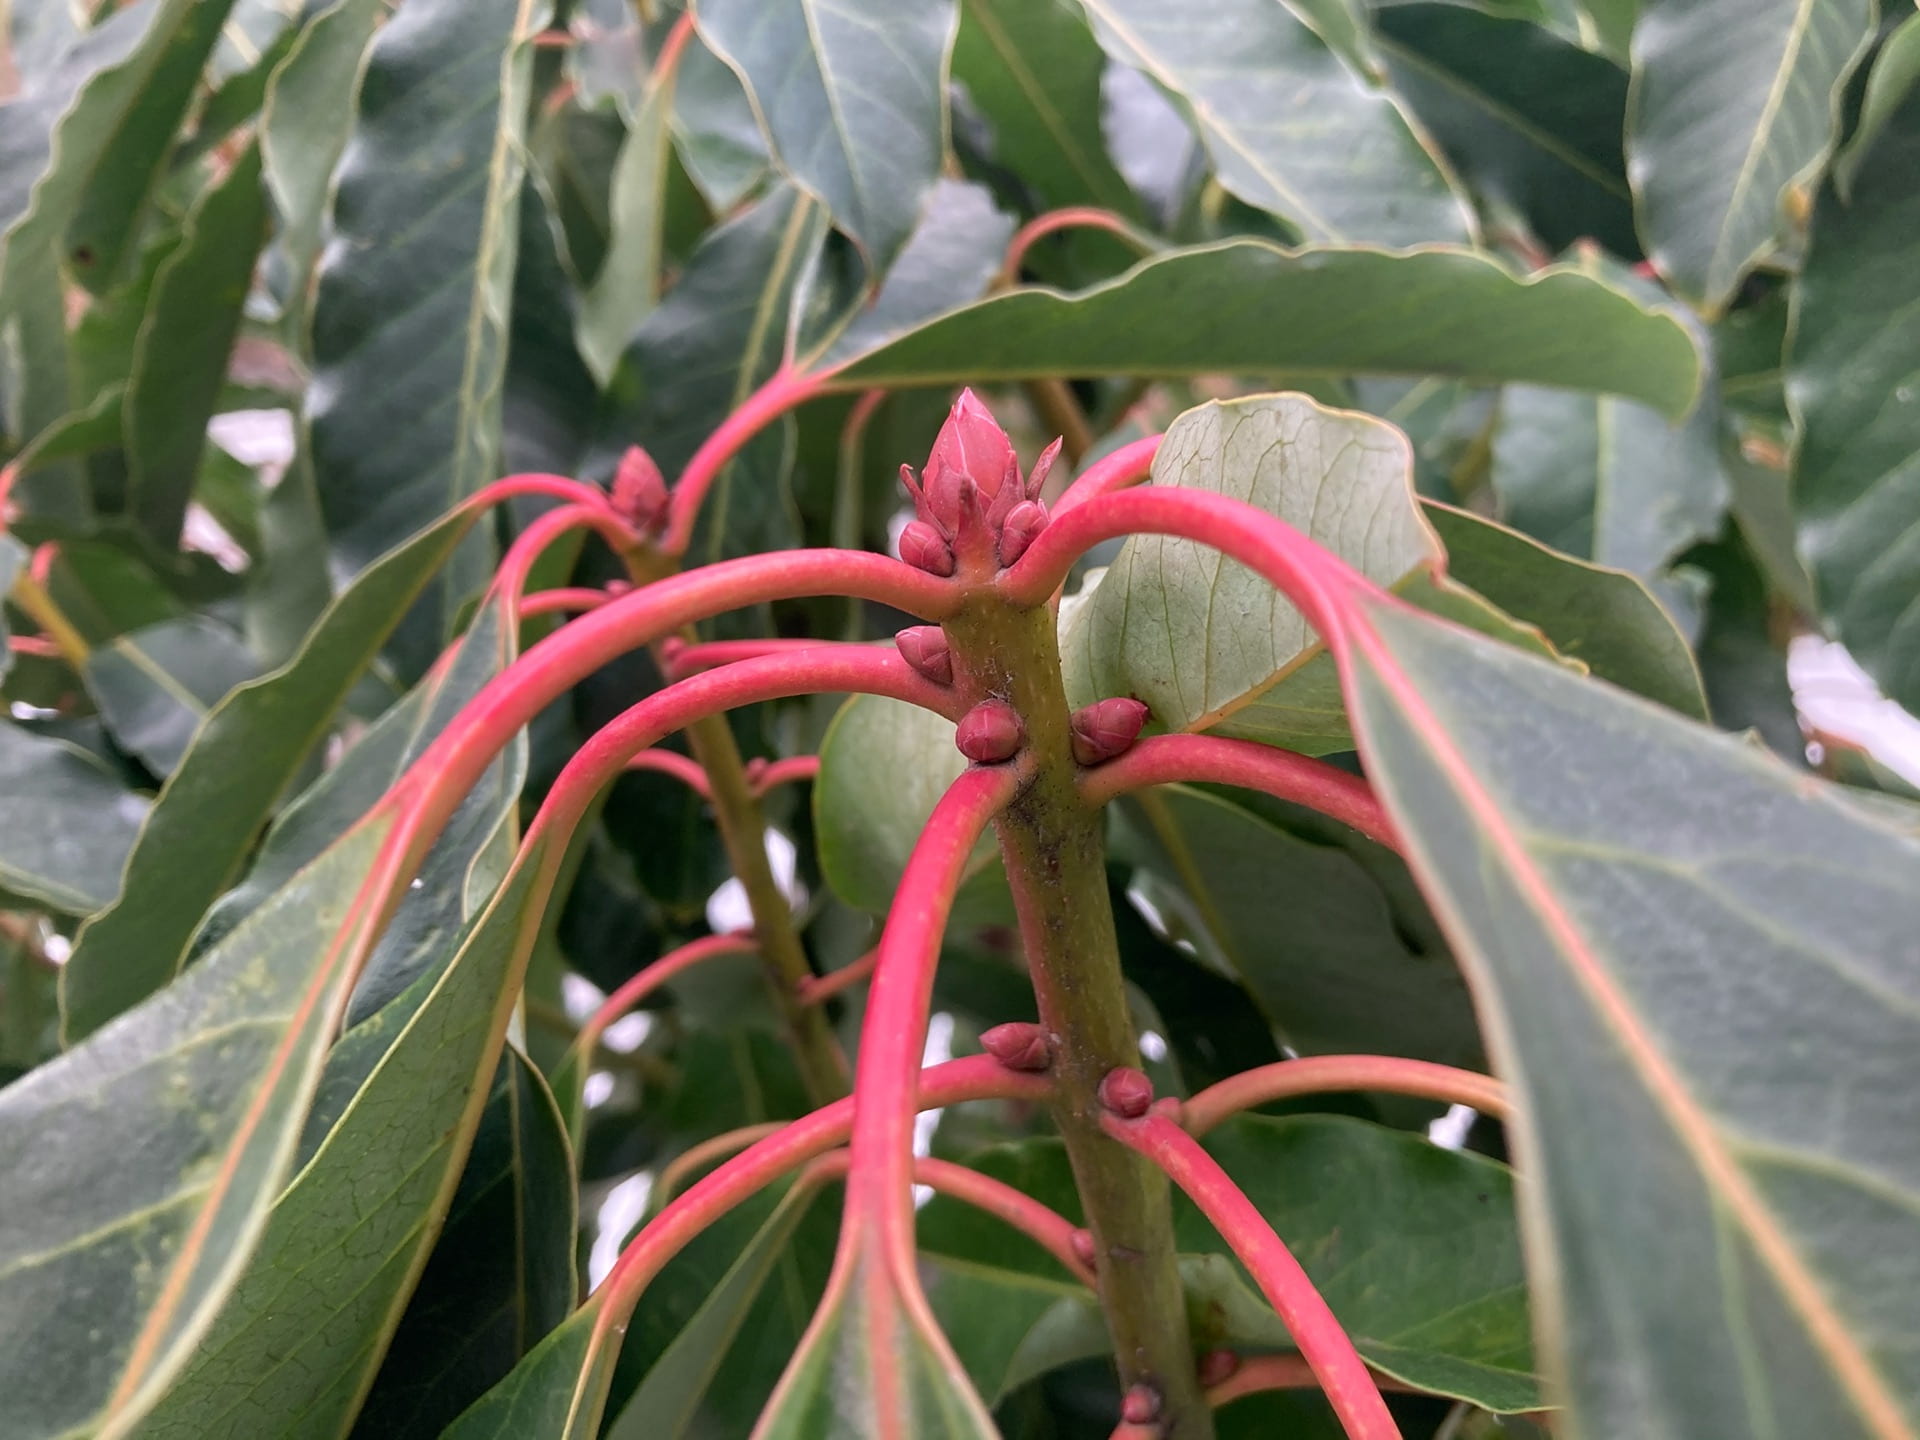 The vibrant red petioles of Daphniphyllum macropodum contrasts with its glossy green evergreen leaves.